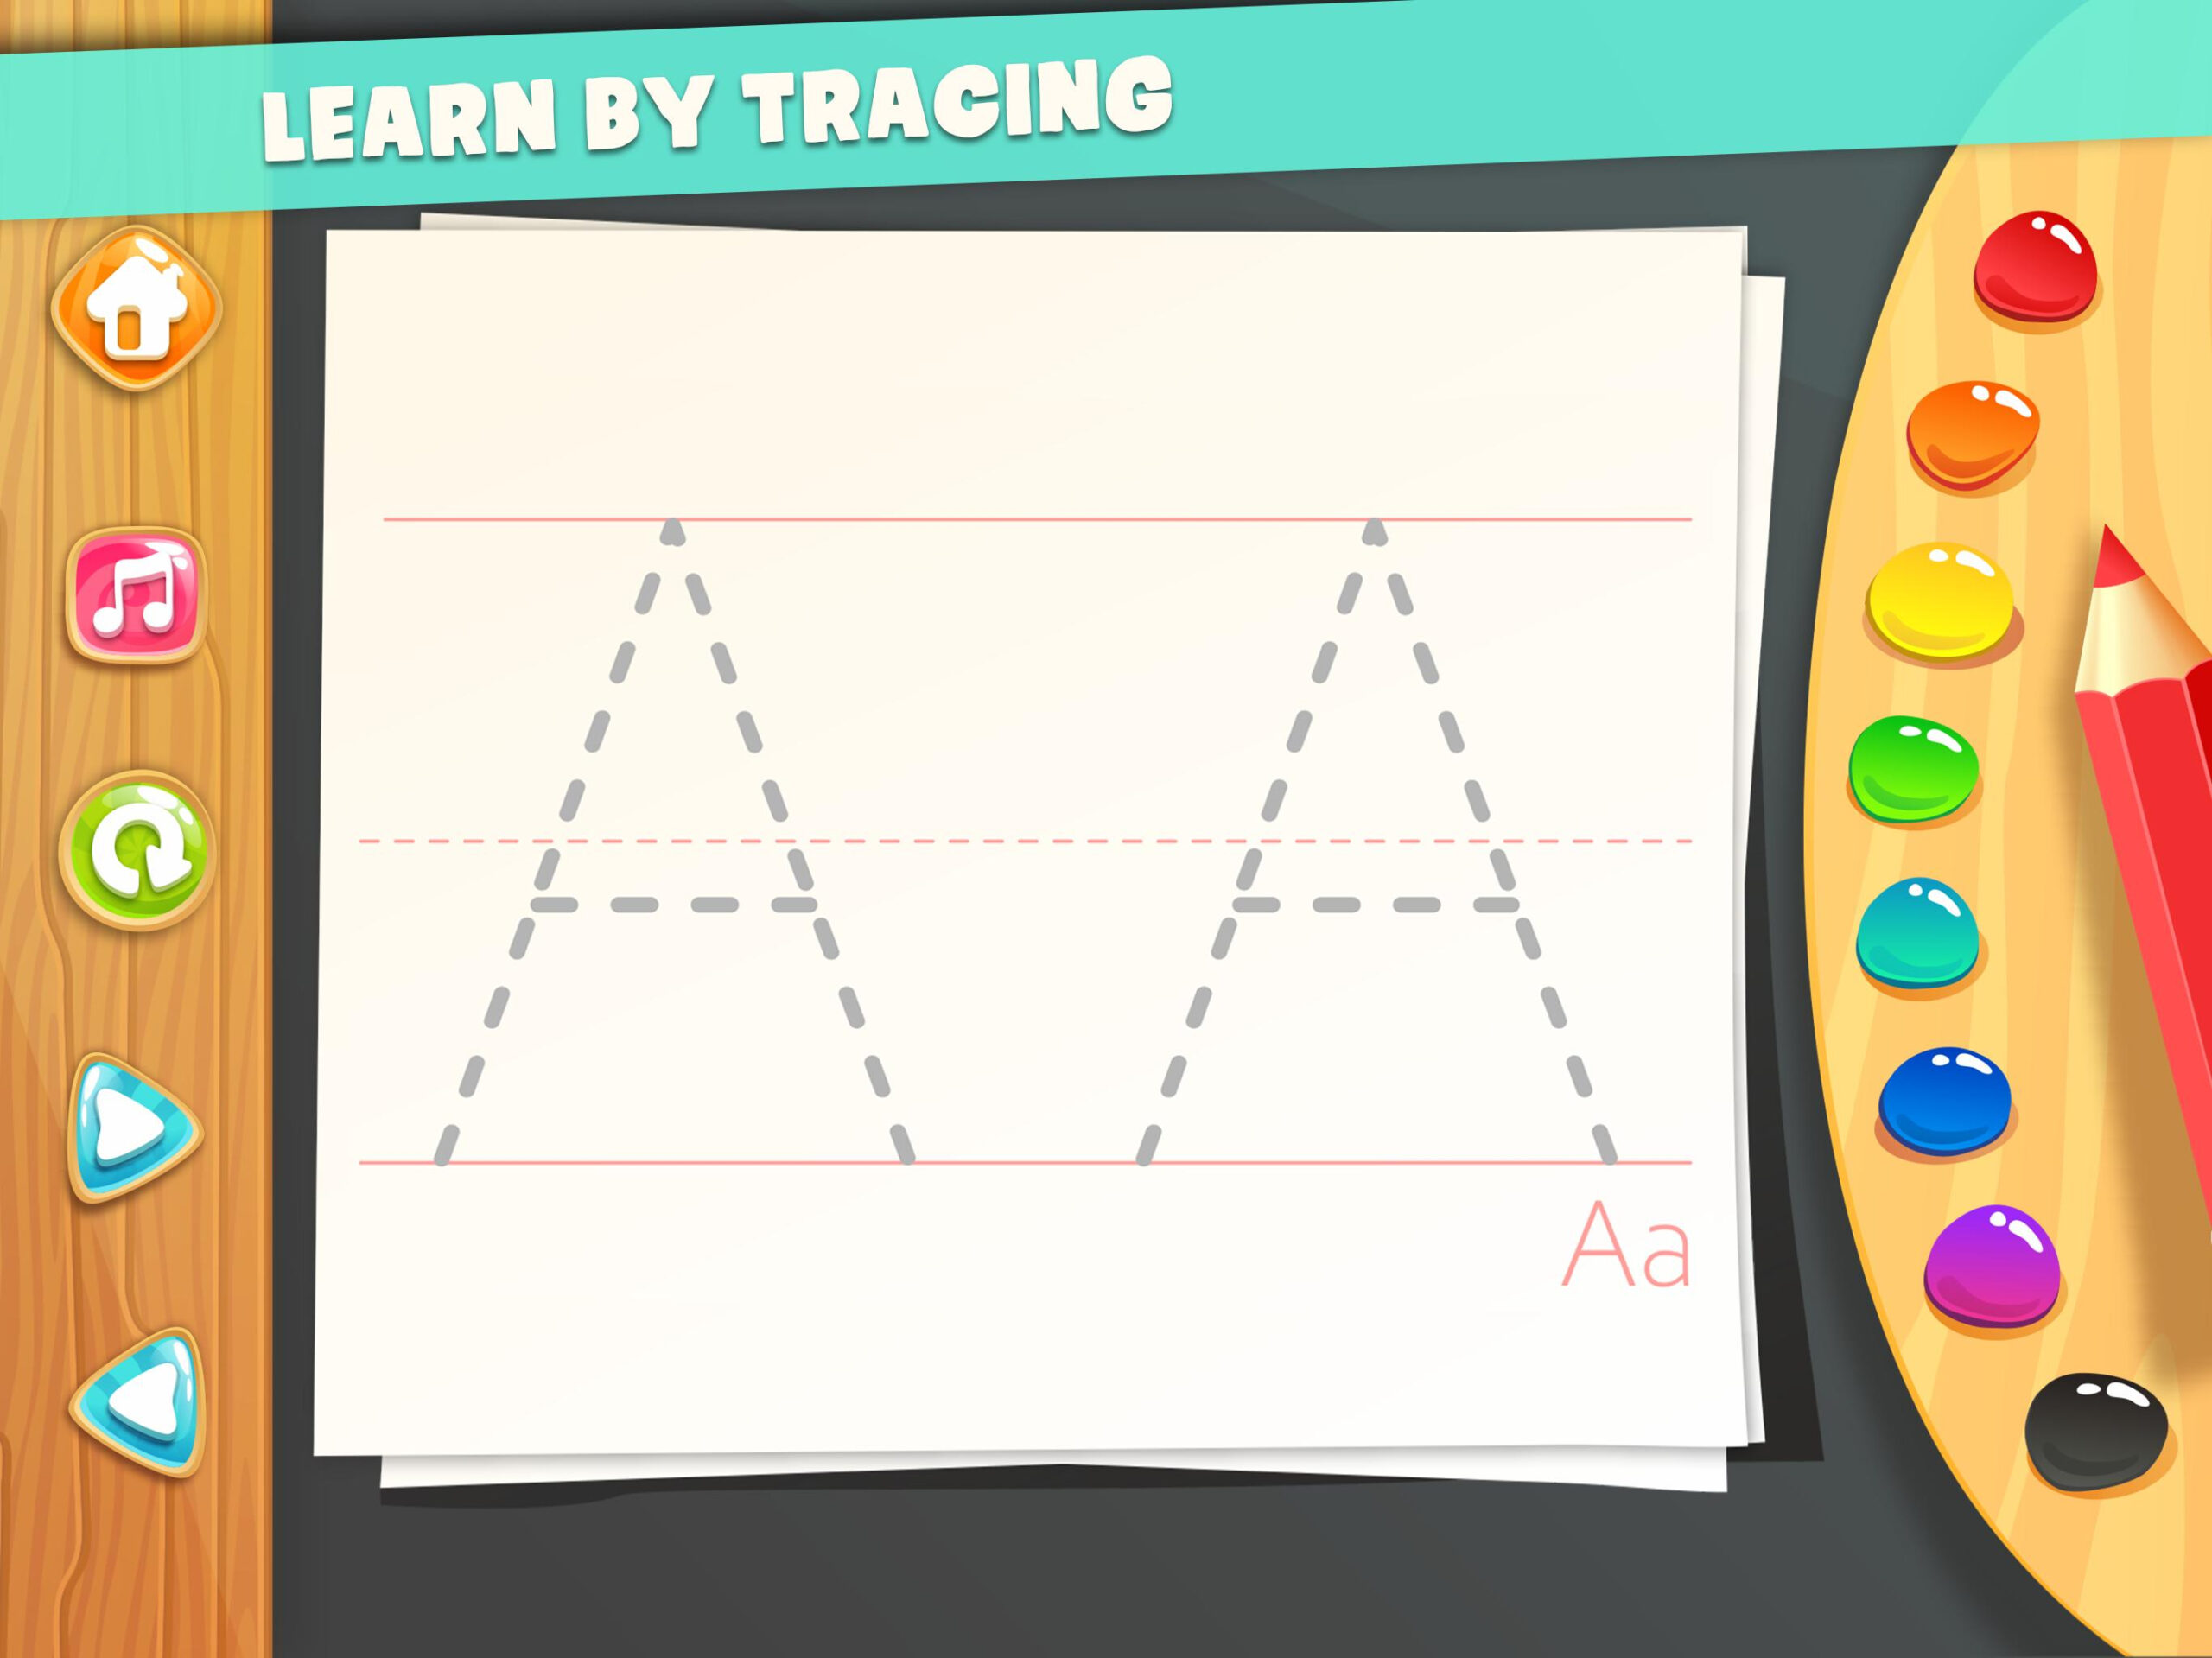 Abc Tracing For Kids Free Games For Android - Apk Download inside Abc Tracing Mod Apk